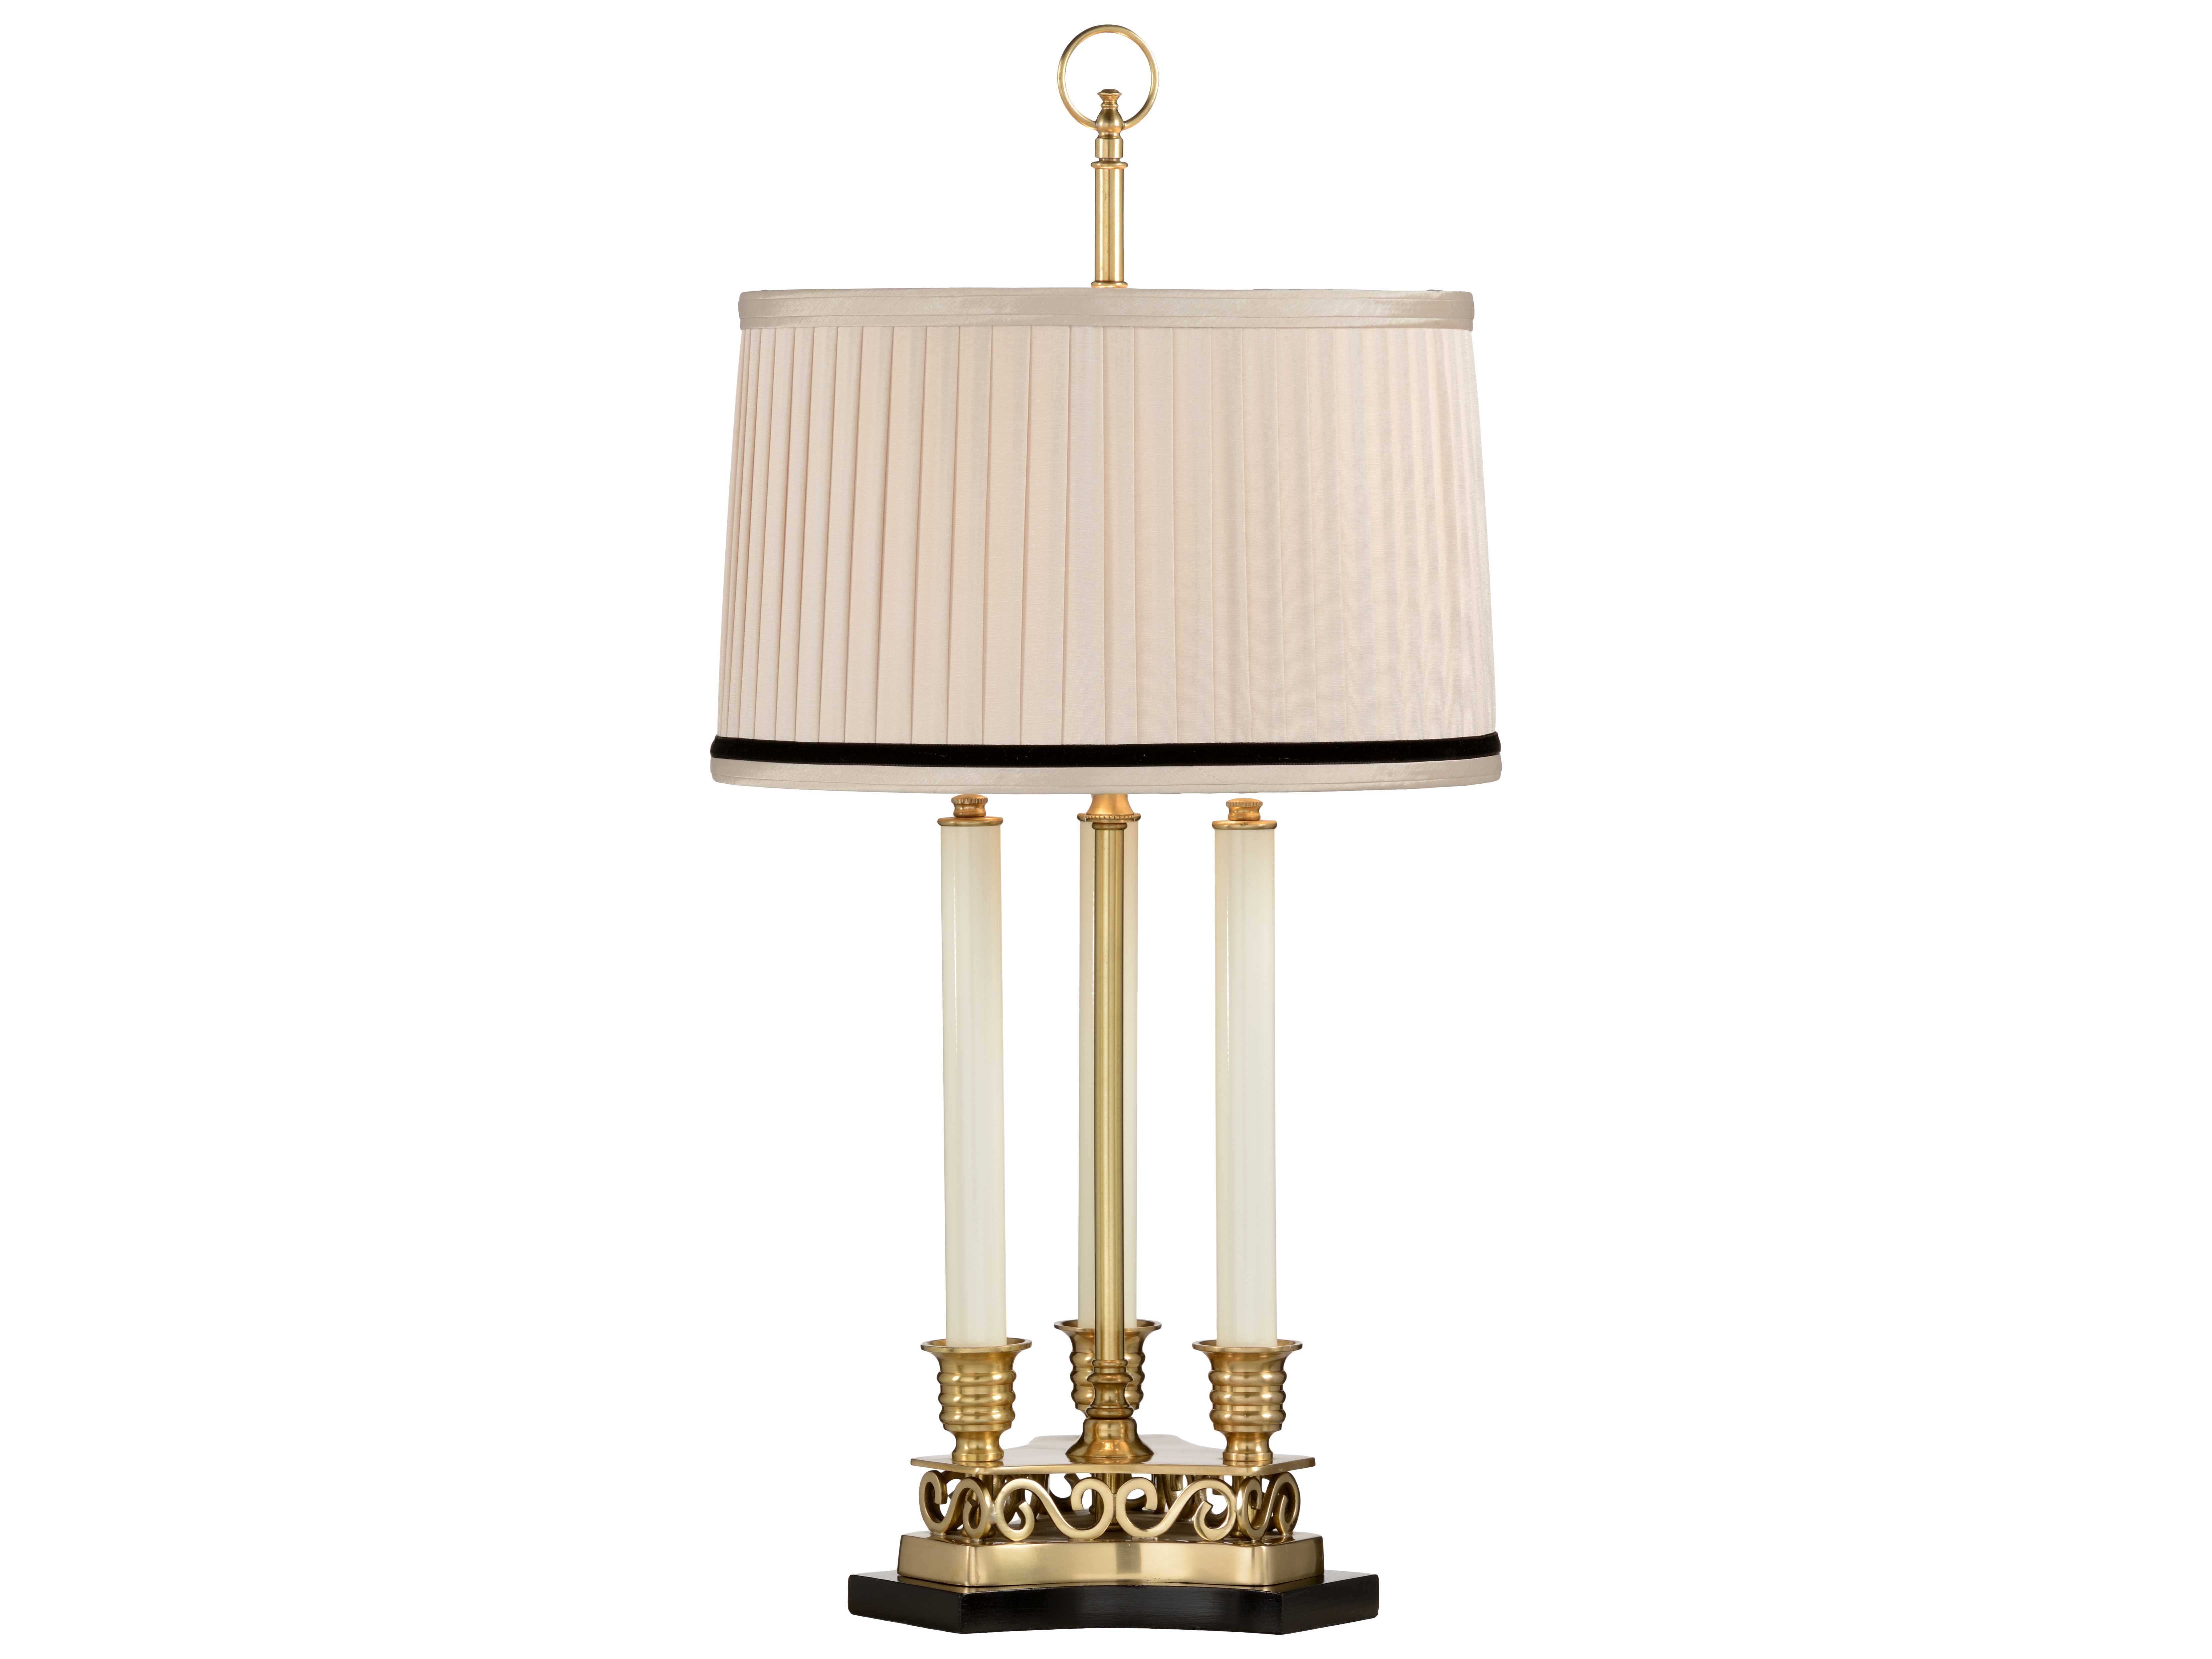 Wildwood Lamps Thea Triple Candle, Fluted Candlestick Antique Brass Table Lamp Base